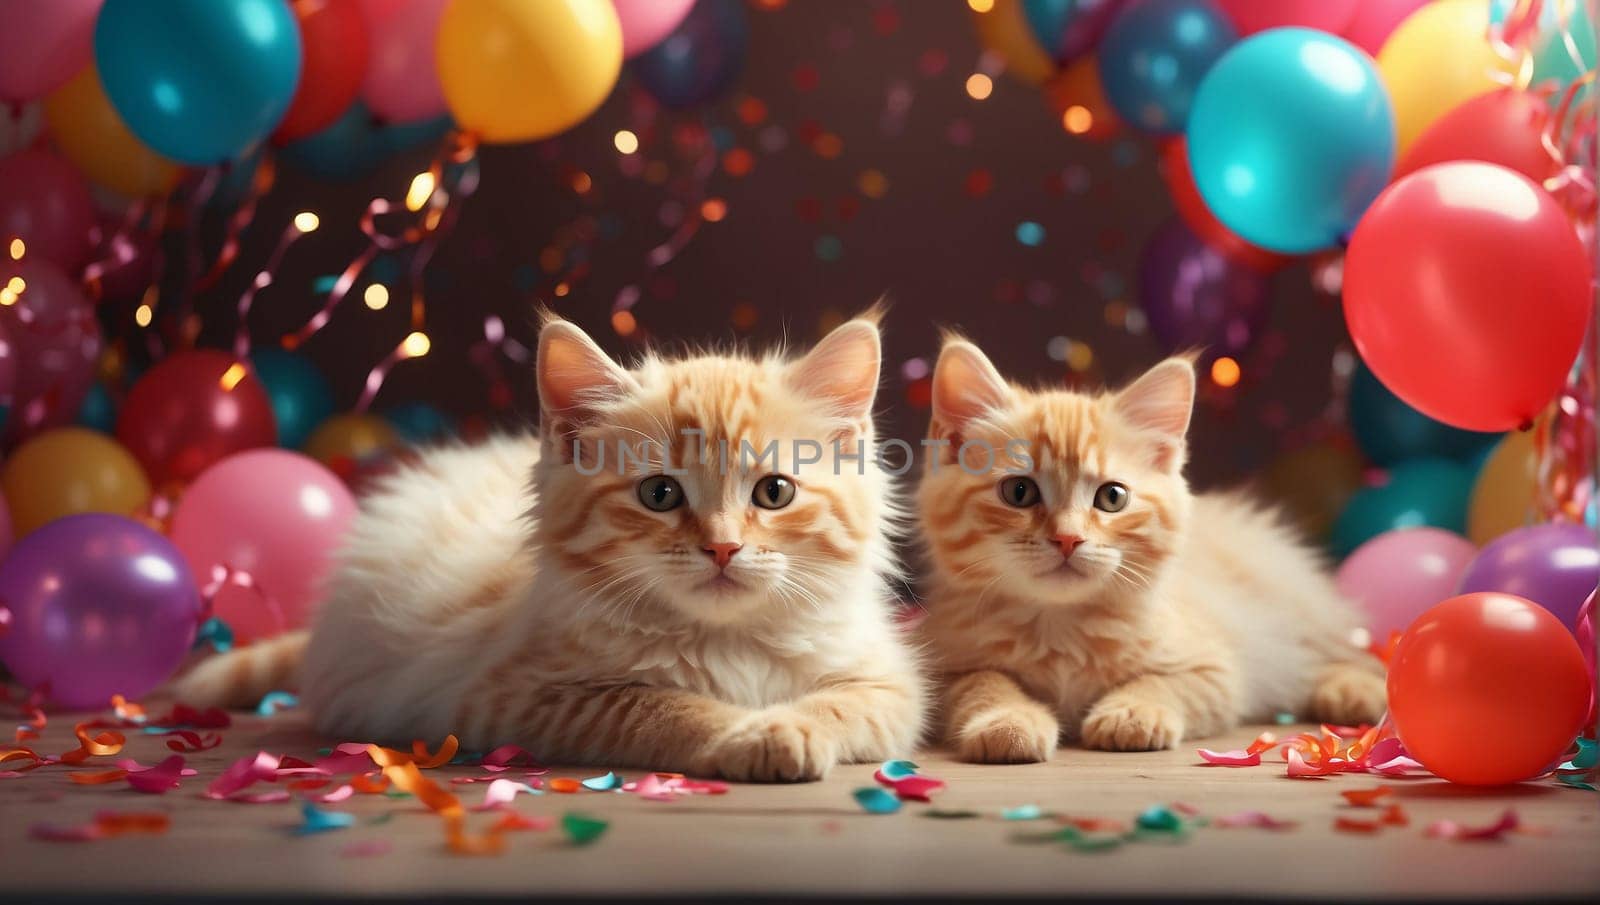 Kittens on a dark festive background surrounded by colorful balloons